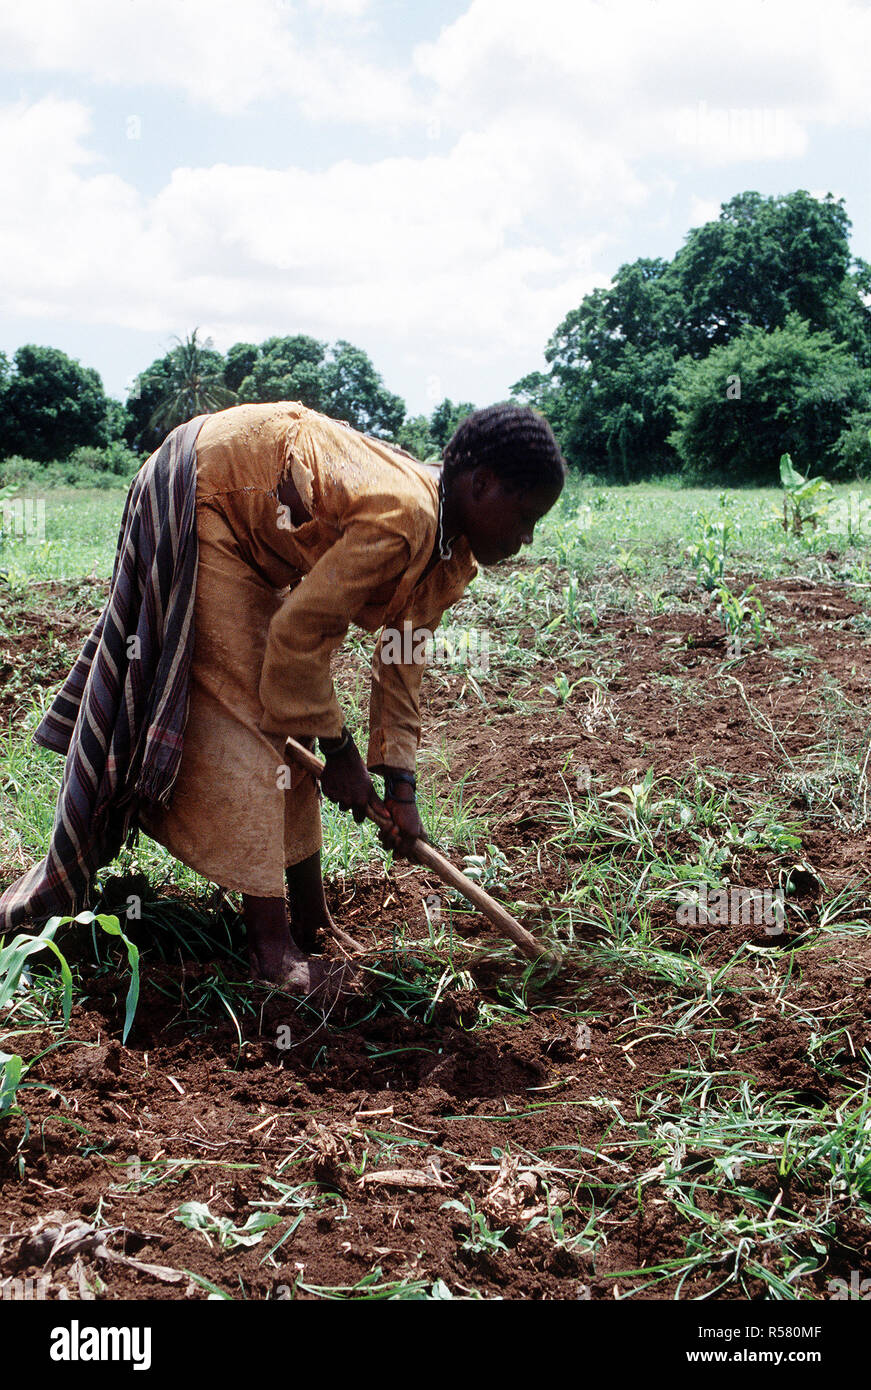 1993 - A Somali woman working in the fields in Kismayo, Somalia while U.S. Forces were in Somalia for Operation Continue Hope. Stock Photo